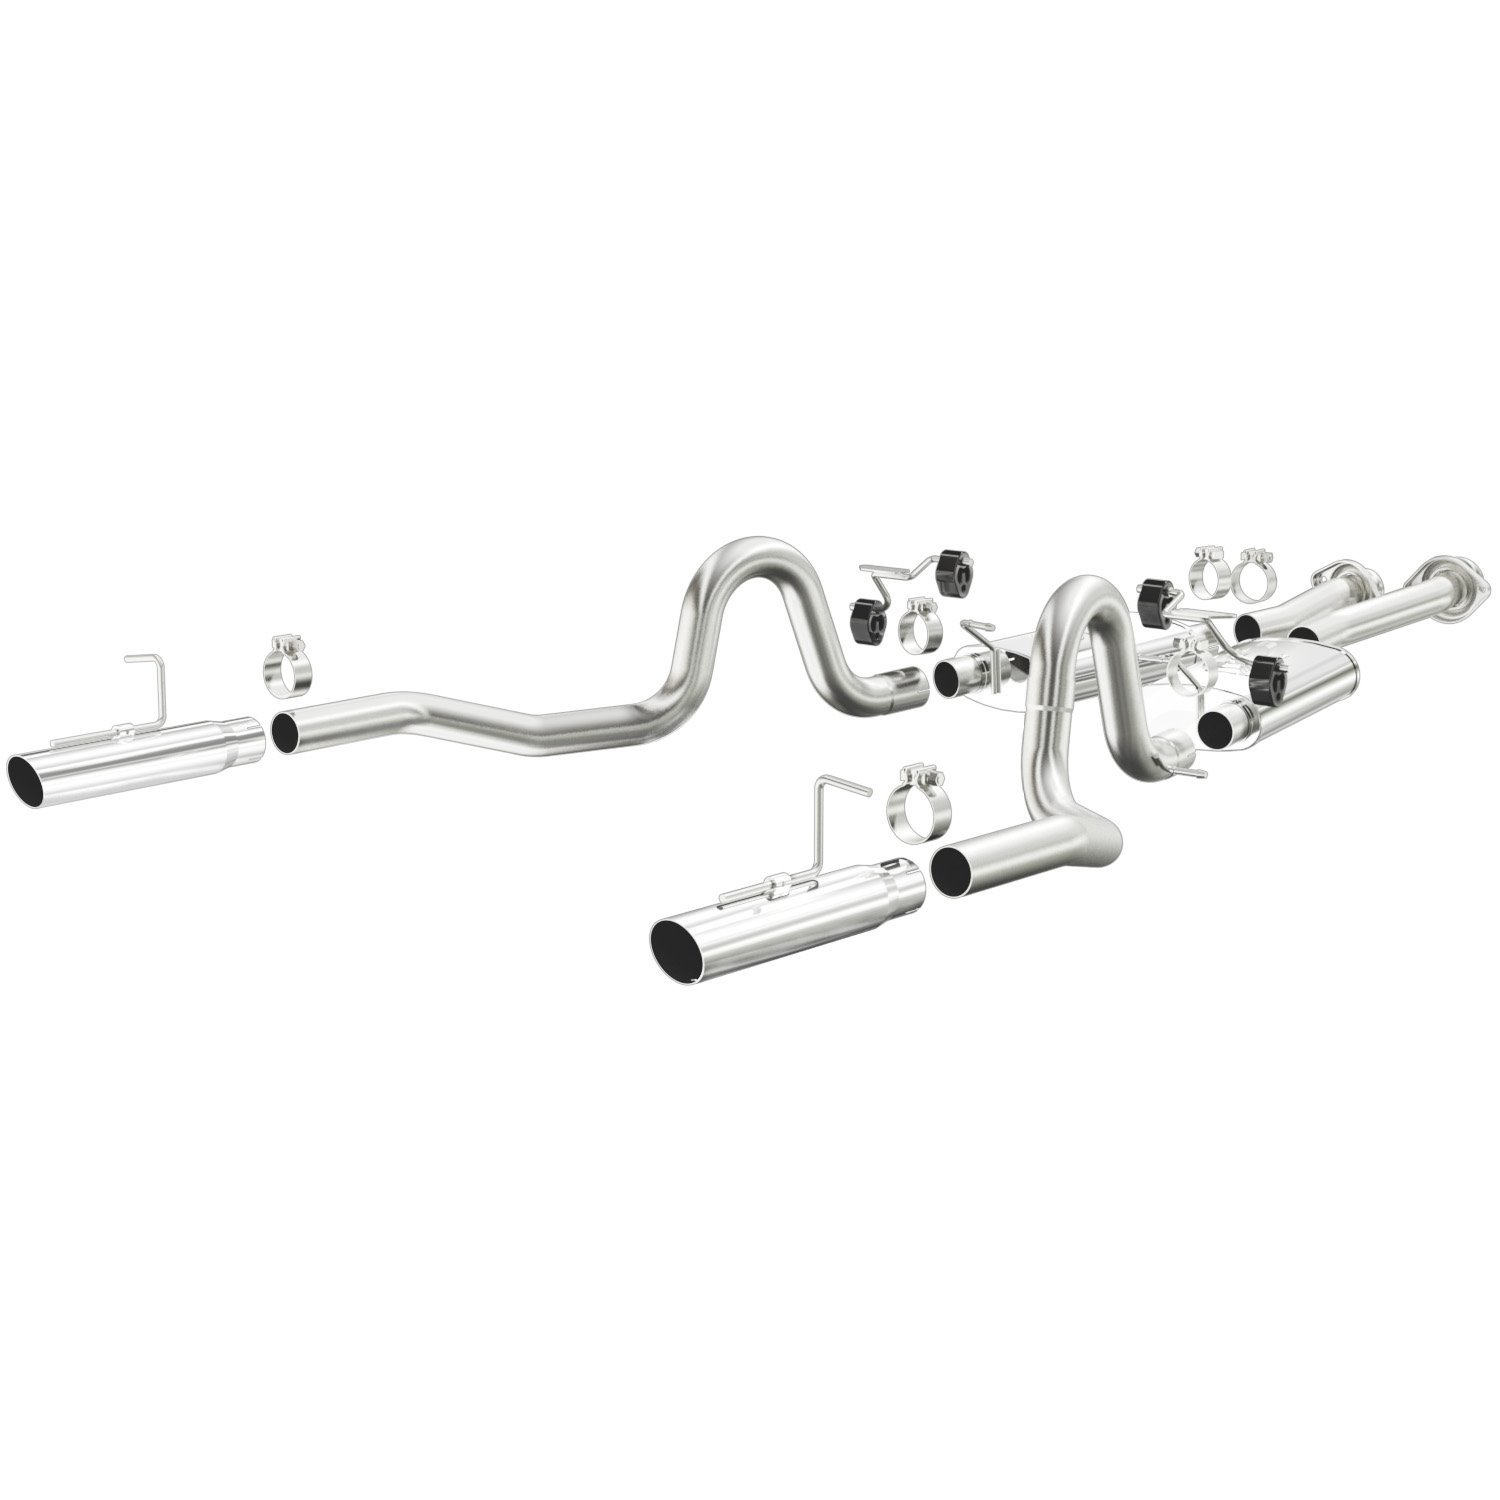 Street Series Cat-Back Exhaust System 1986 Mustang GT/LX 5.0L V8